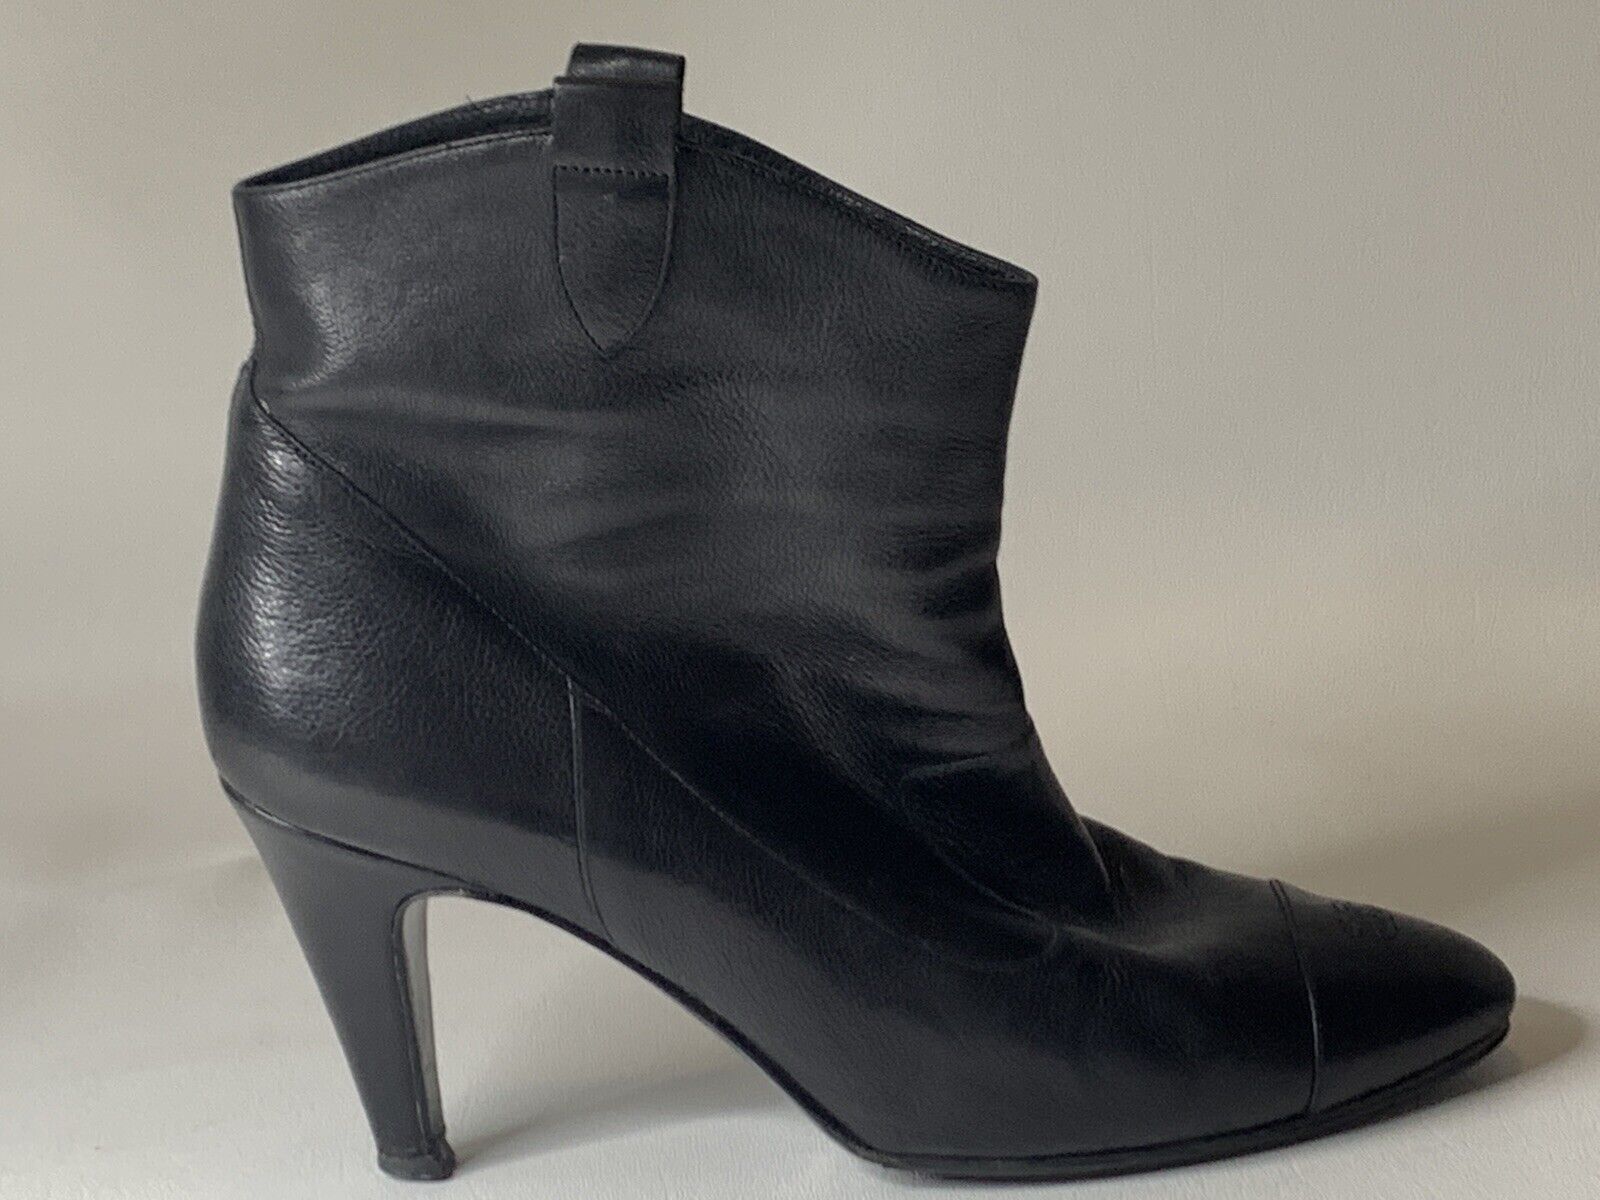 CHANEL  Black Leather Bootie 3.25" Heel | Double C Stitching at Toe | 38.5" CHANEL - фотография #4